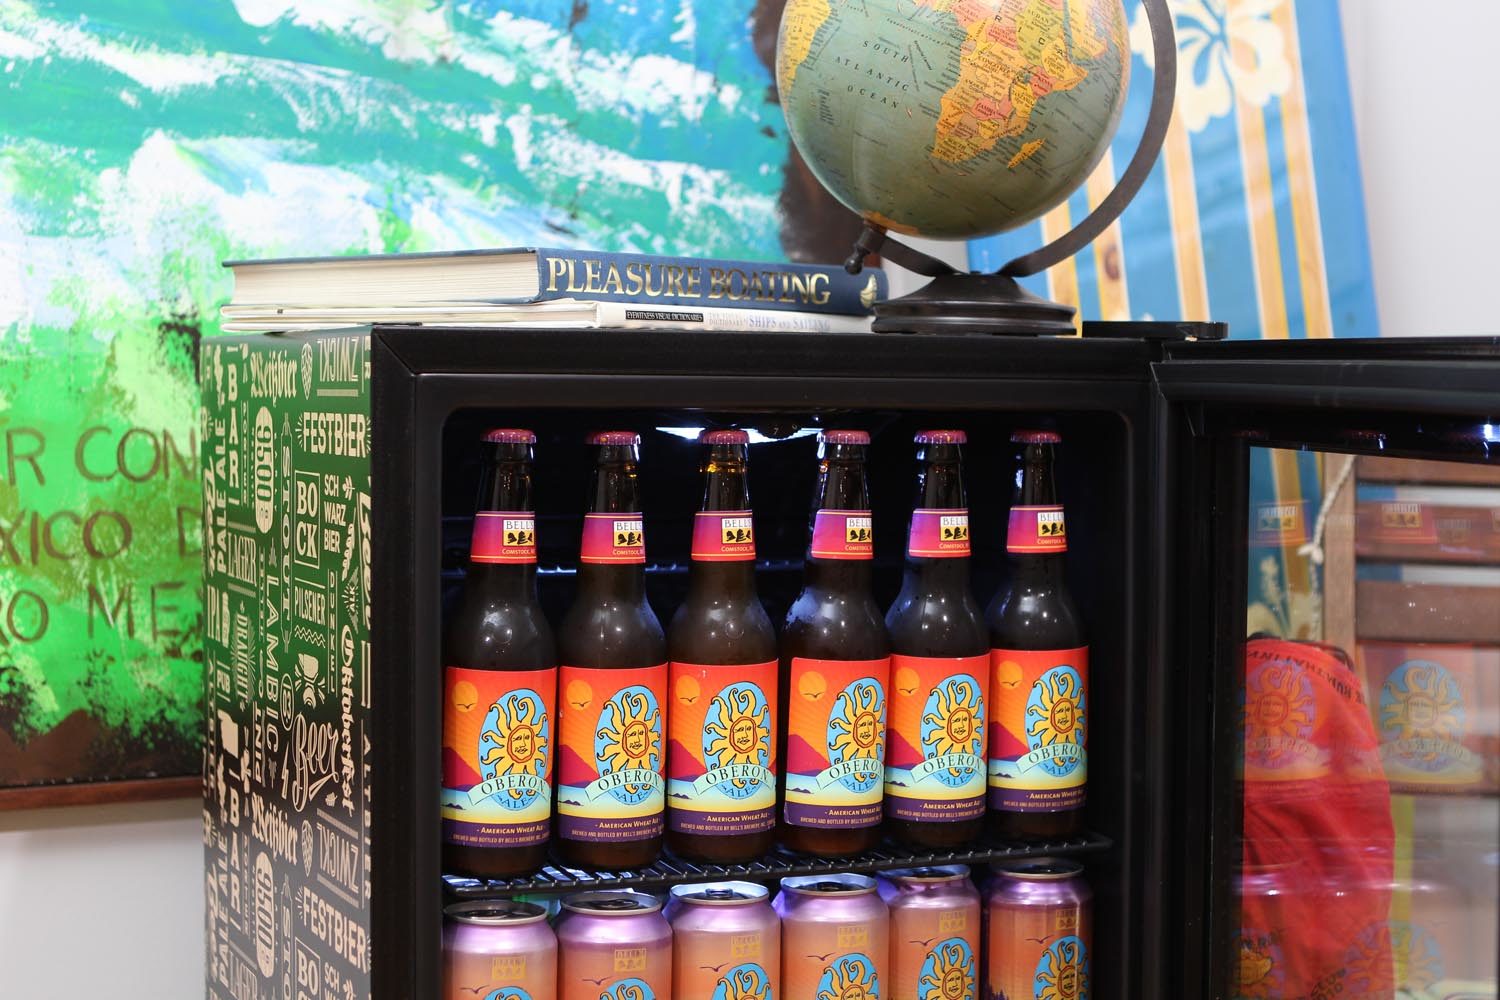 NewAir Beers of the World fridge stocked with Bells Oberon.